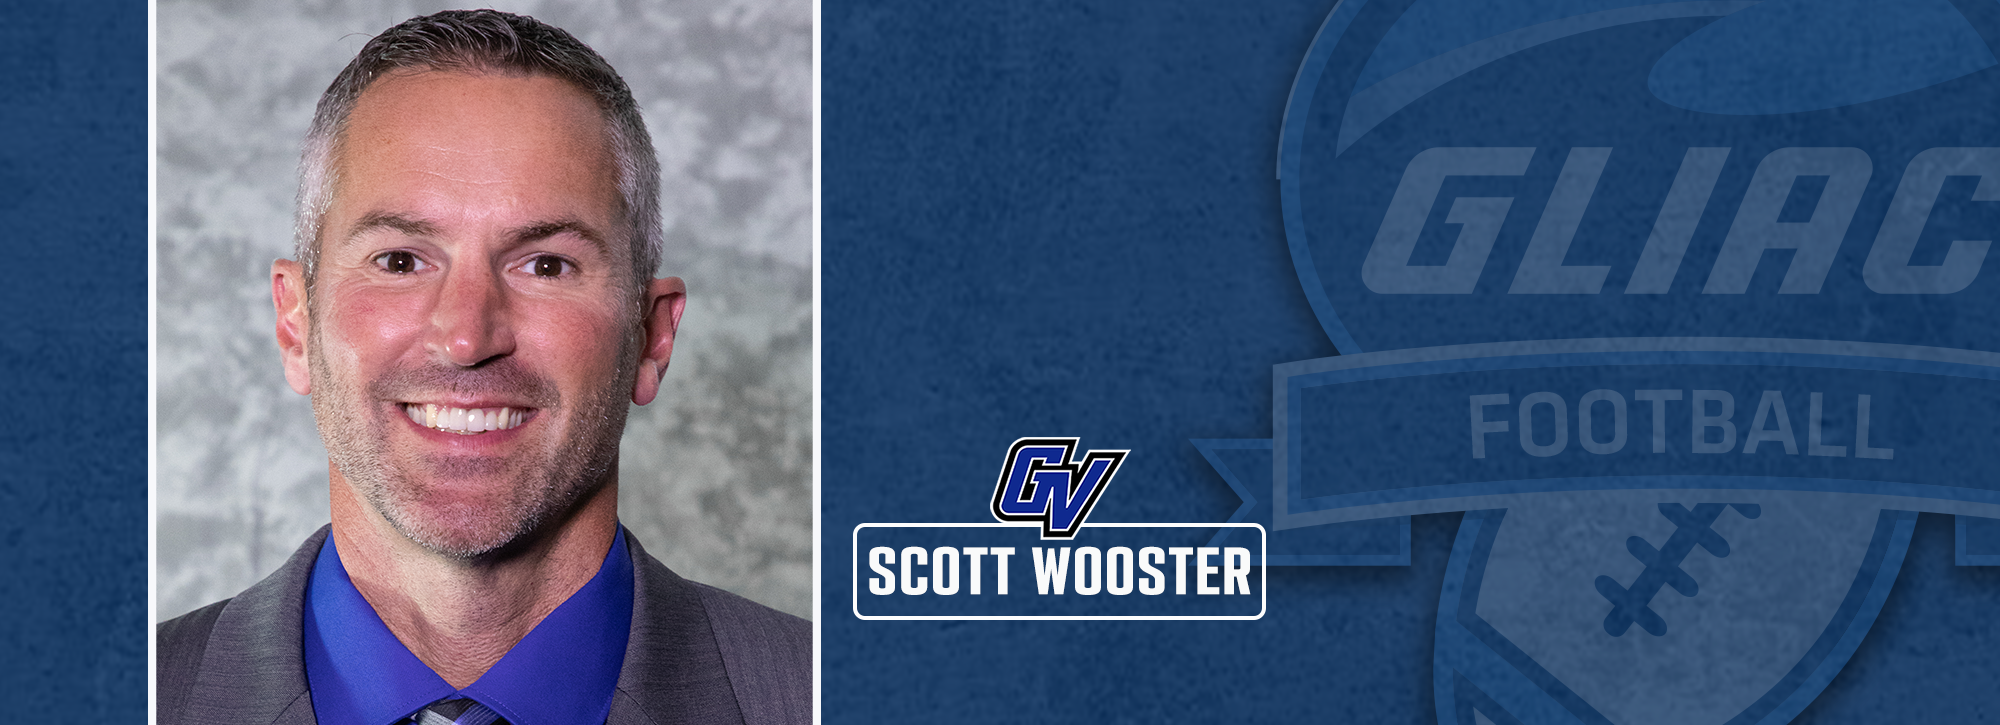 Scott Wooster named head football coach at Grand Valley State